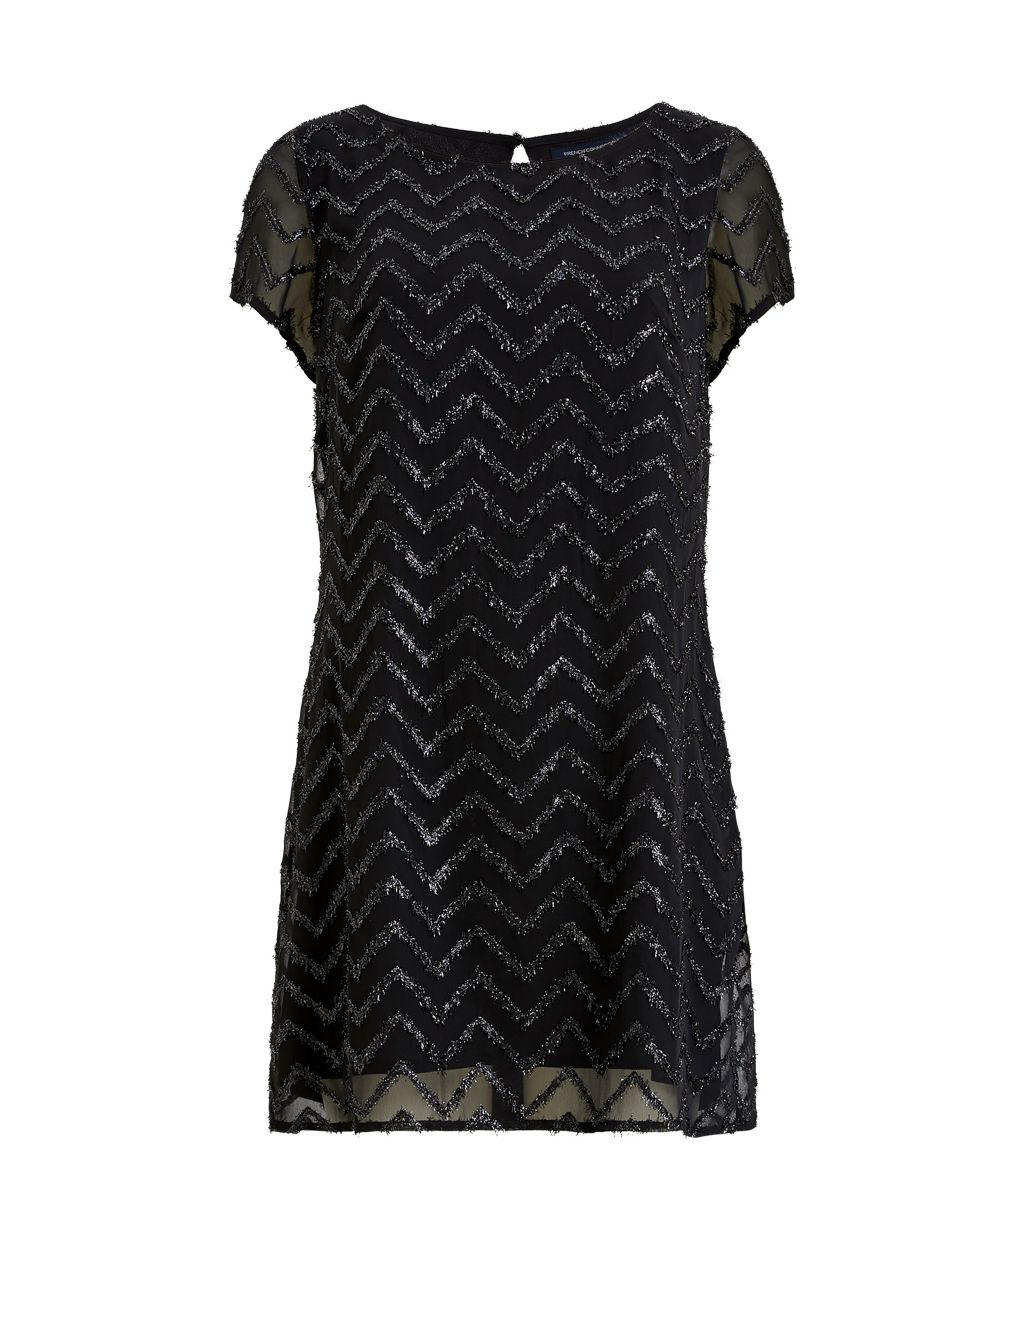 Sparkly Textured Round Neck Mini Shift Dress | French Connection | M&S